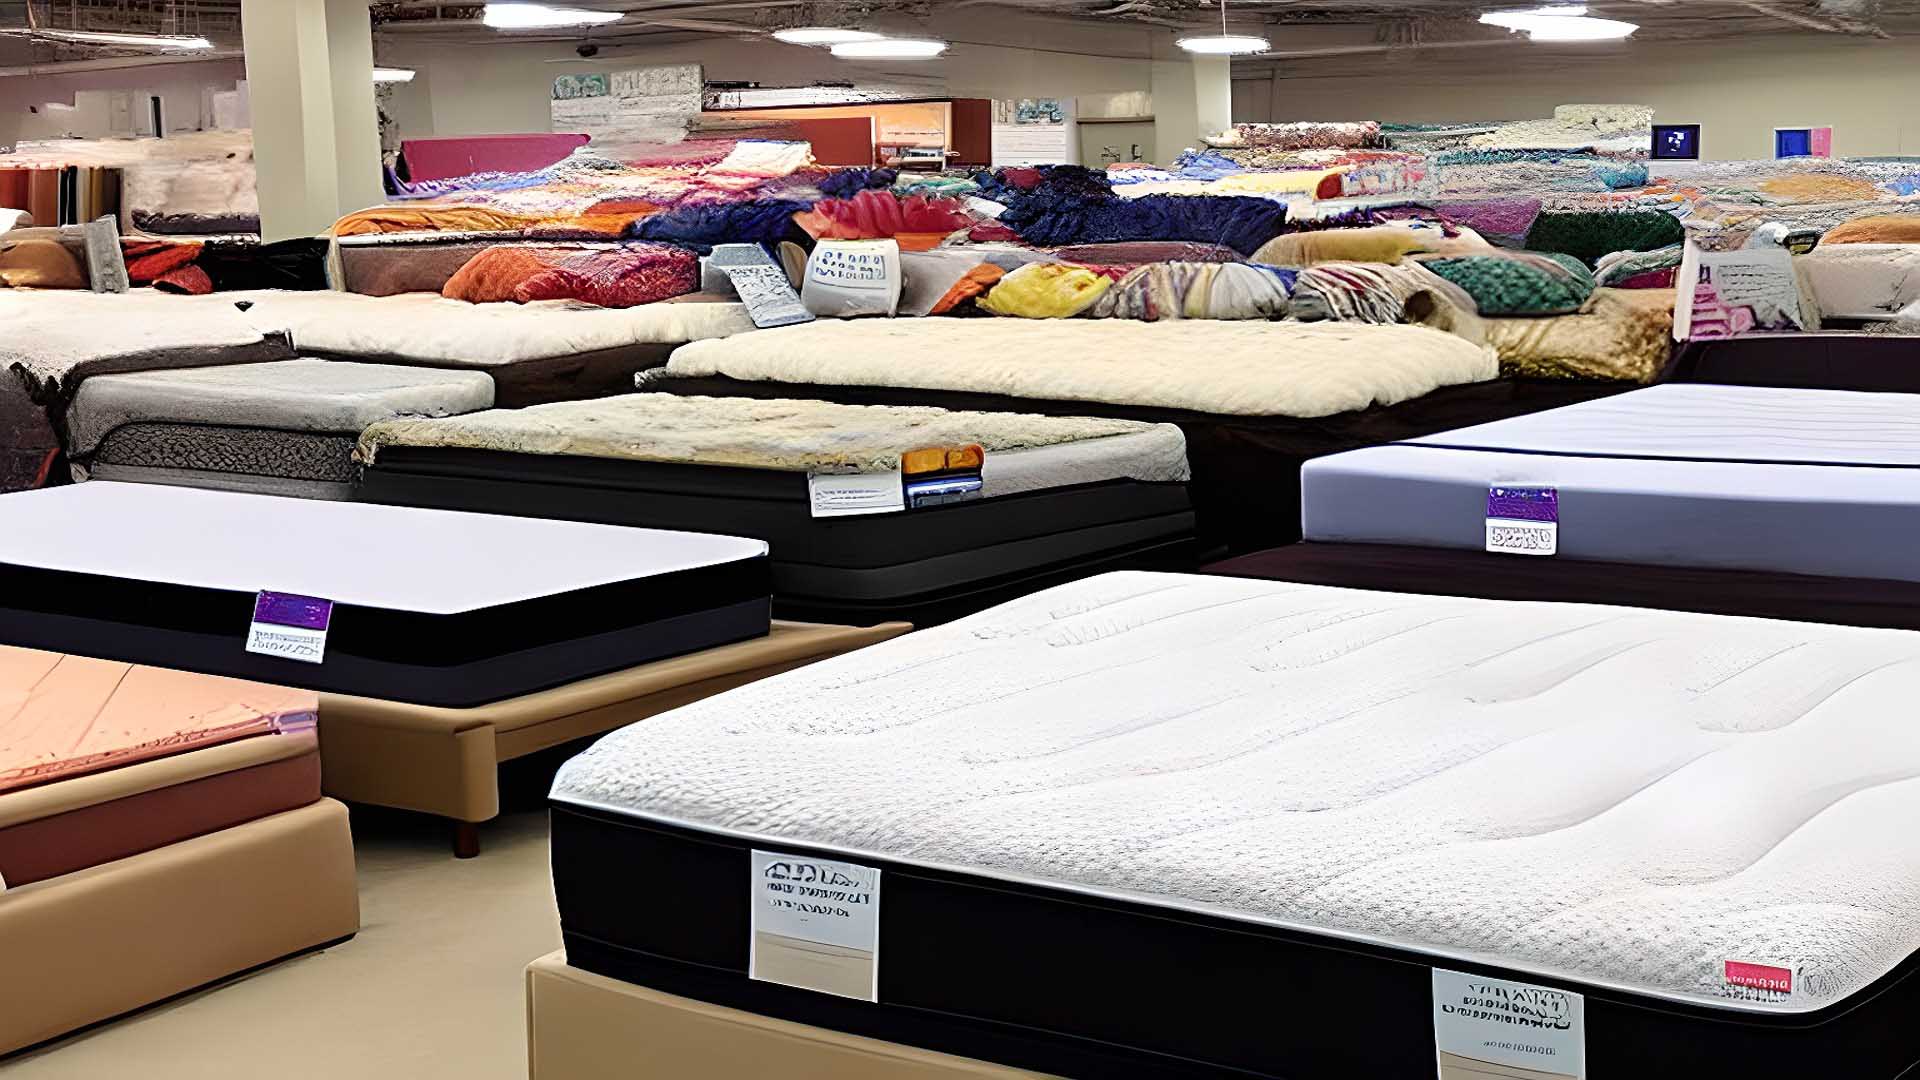 Mattress Sales & Deals in Flushing, NY